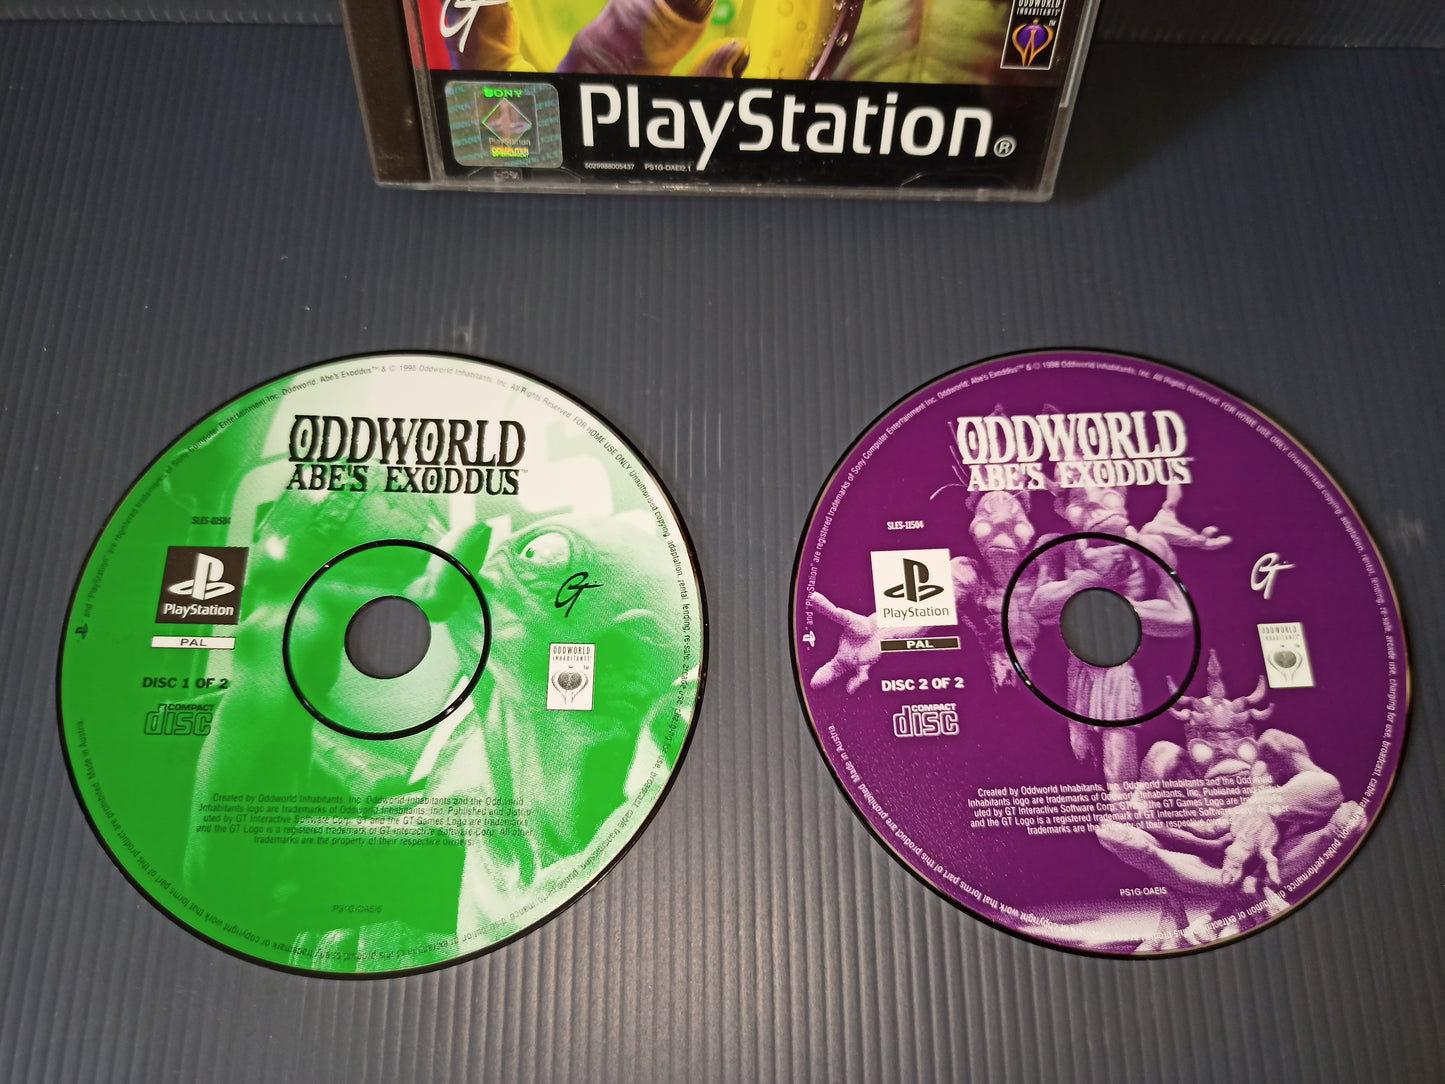 Oddworld Abe's Exoddus video game for Ps1